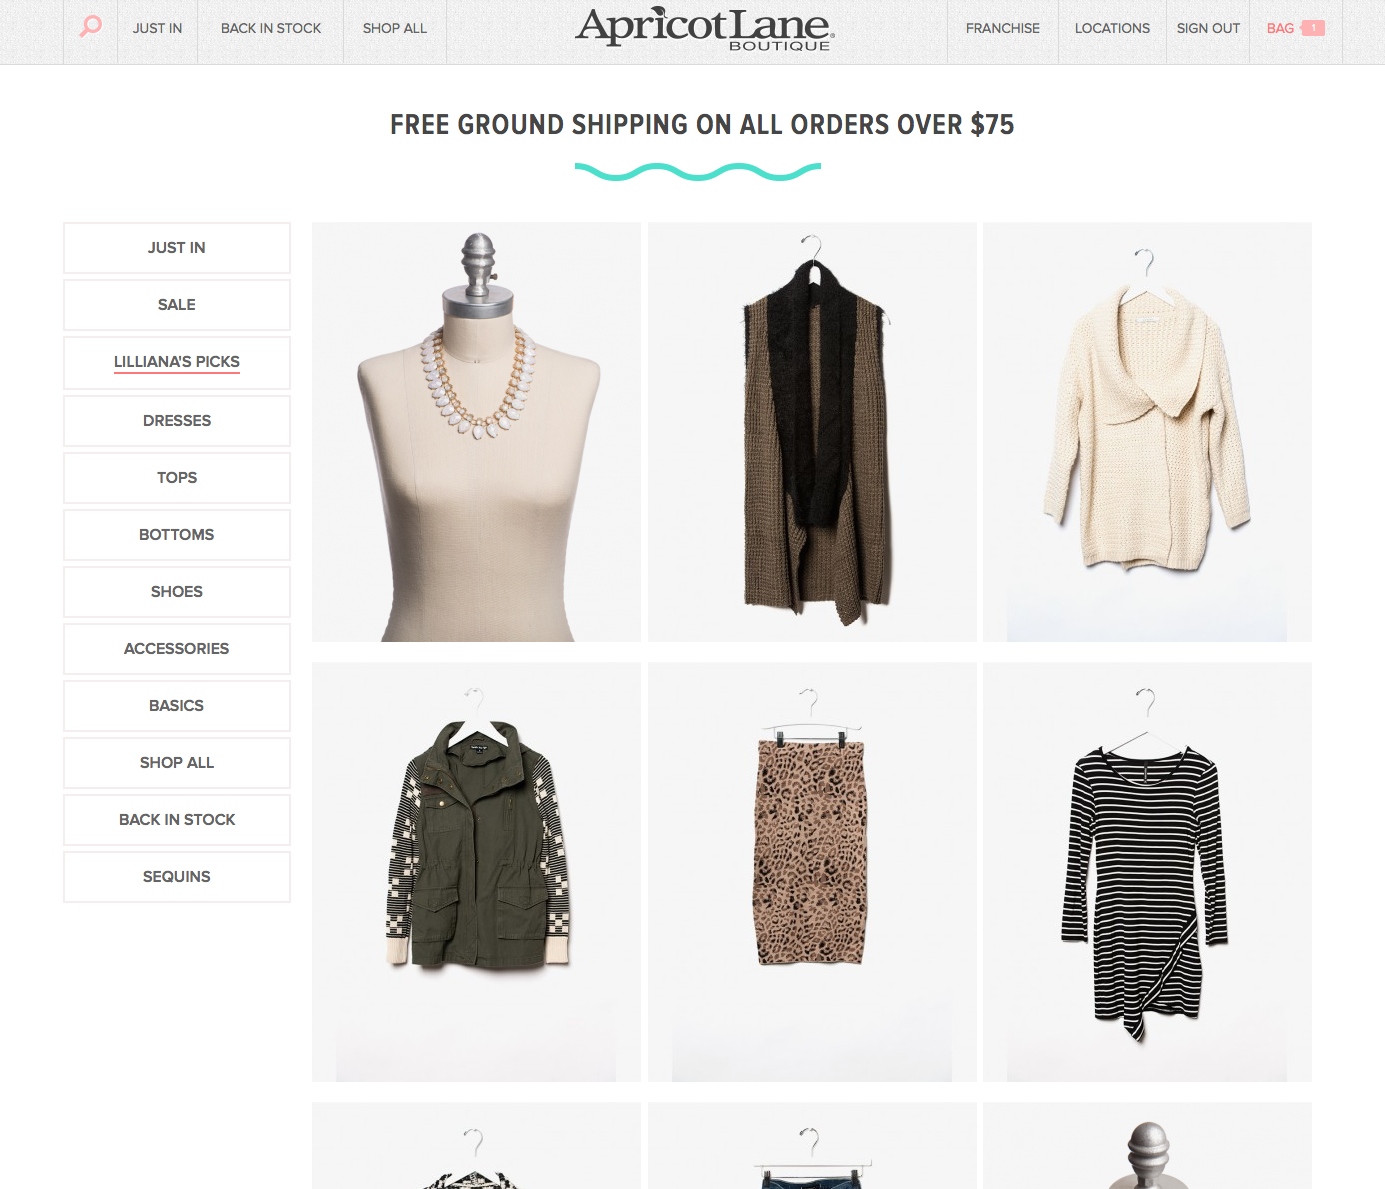 Product selection image from Apricot Lane website